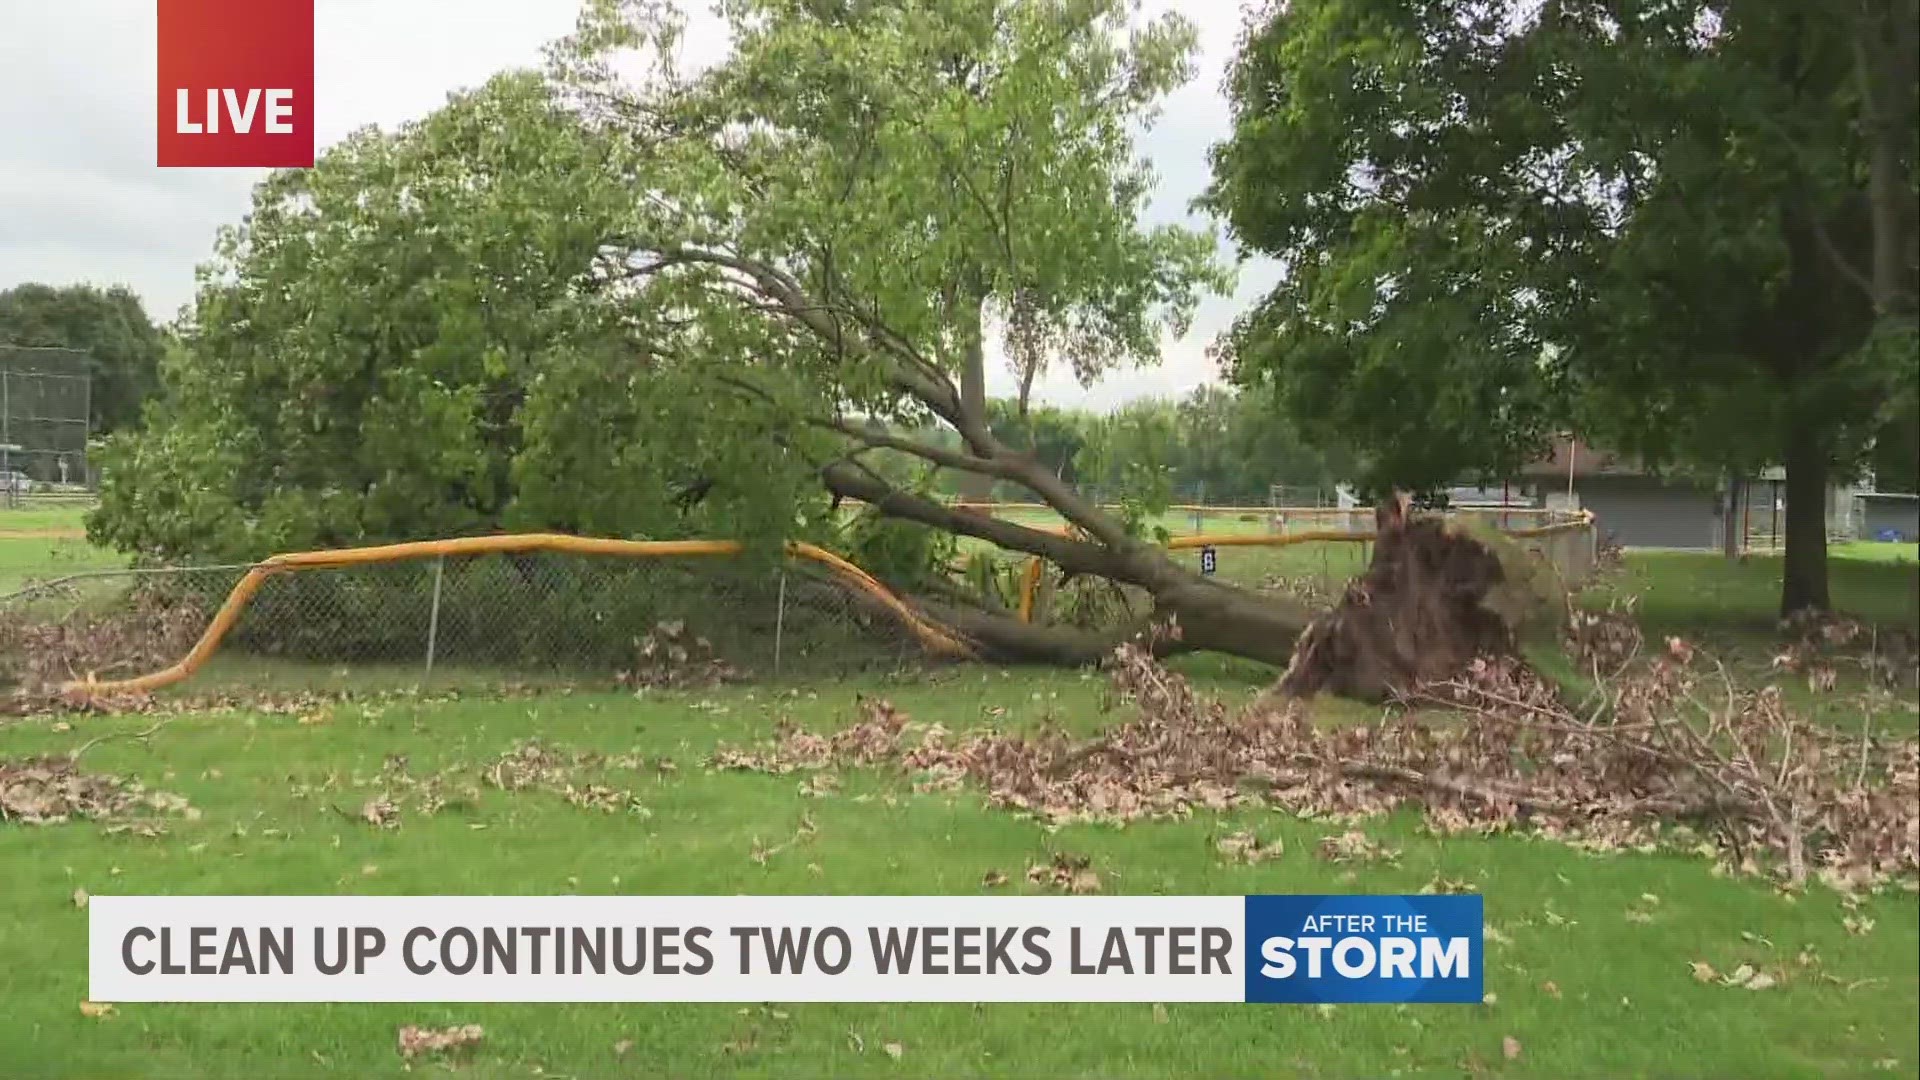 The city of Grand Rapids is still working to clean up debris from storms a few weeks back. Meteorologist Michael Behrens explains how they prioritize their efforts.